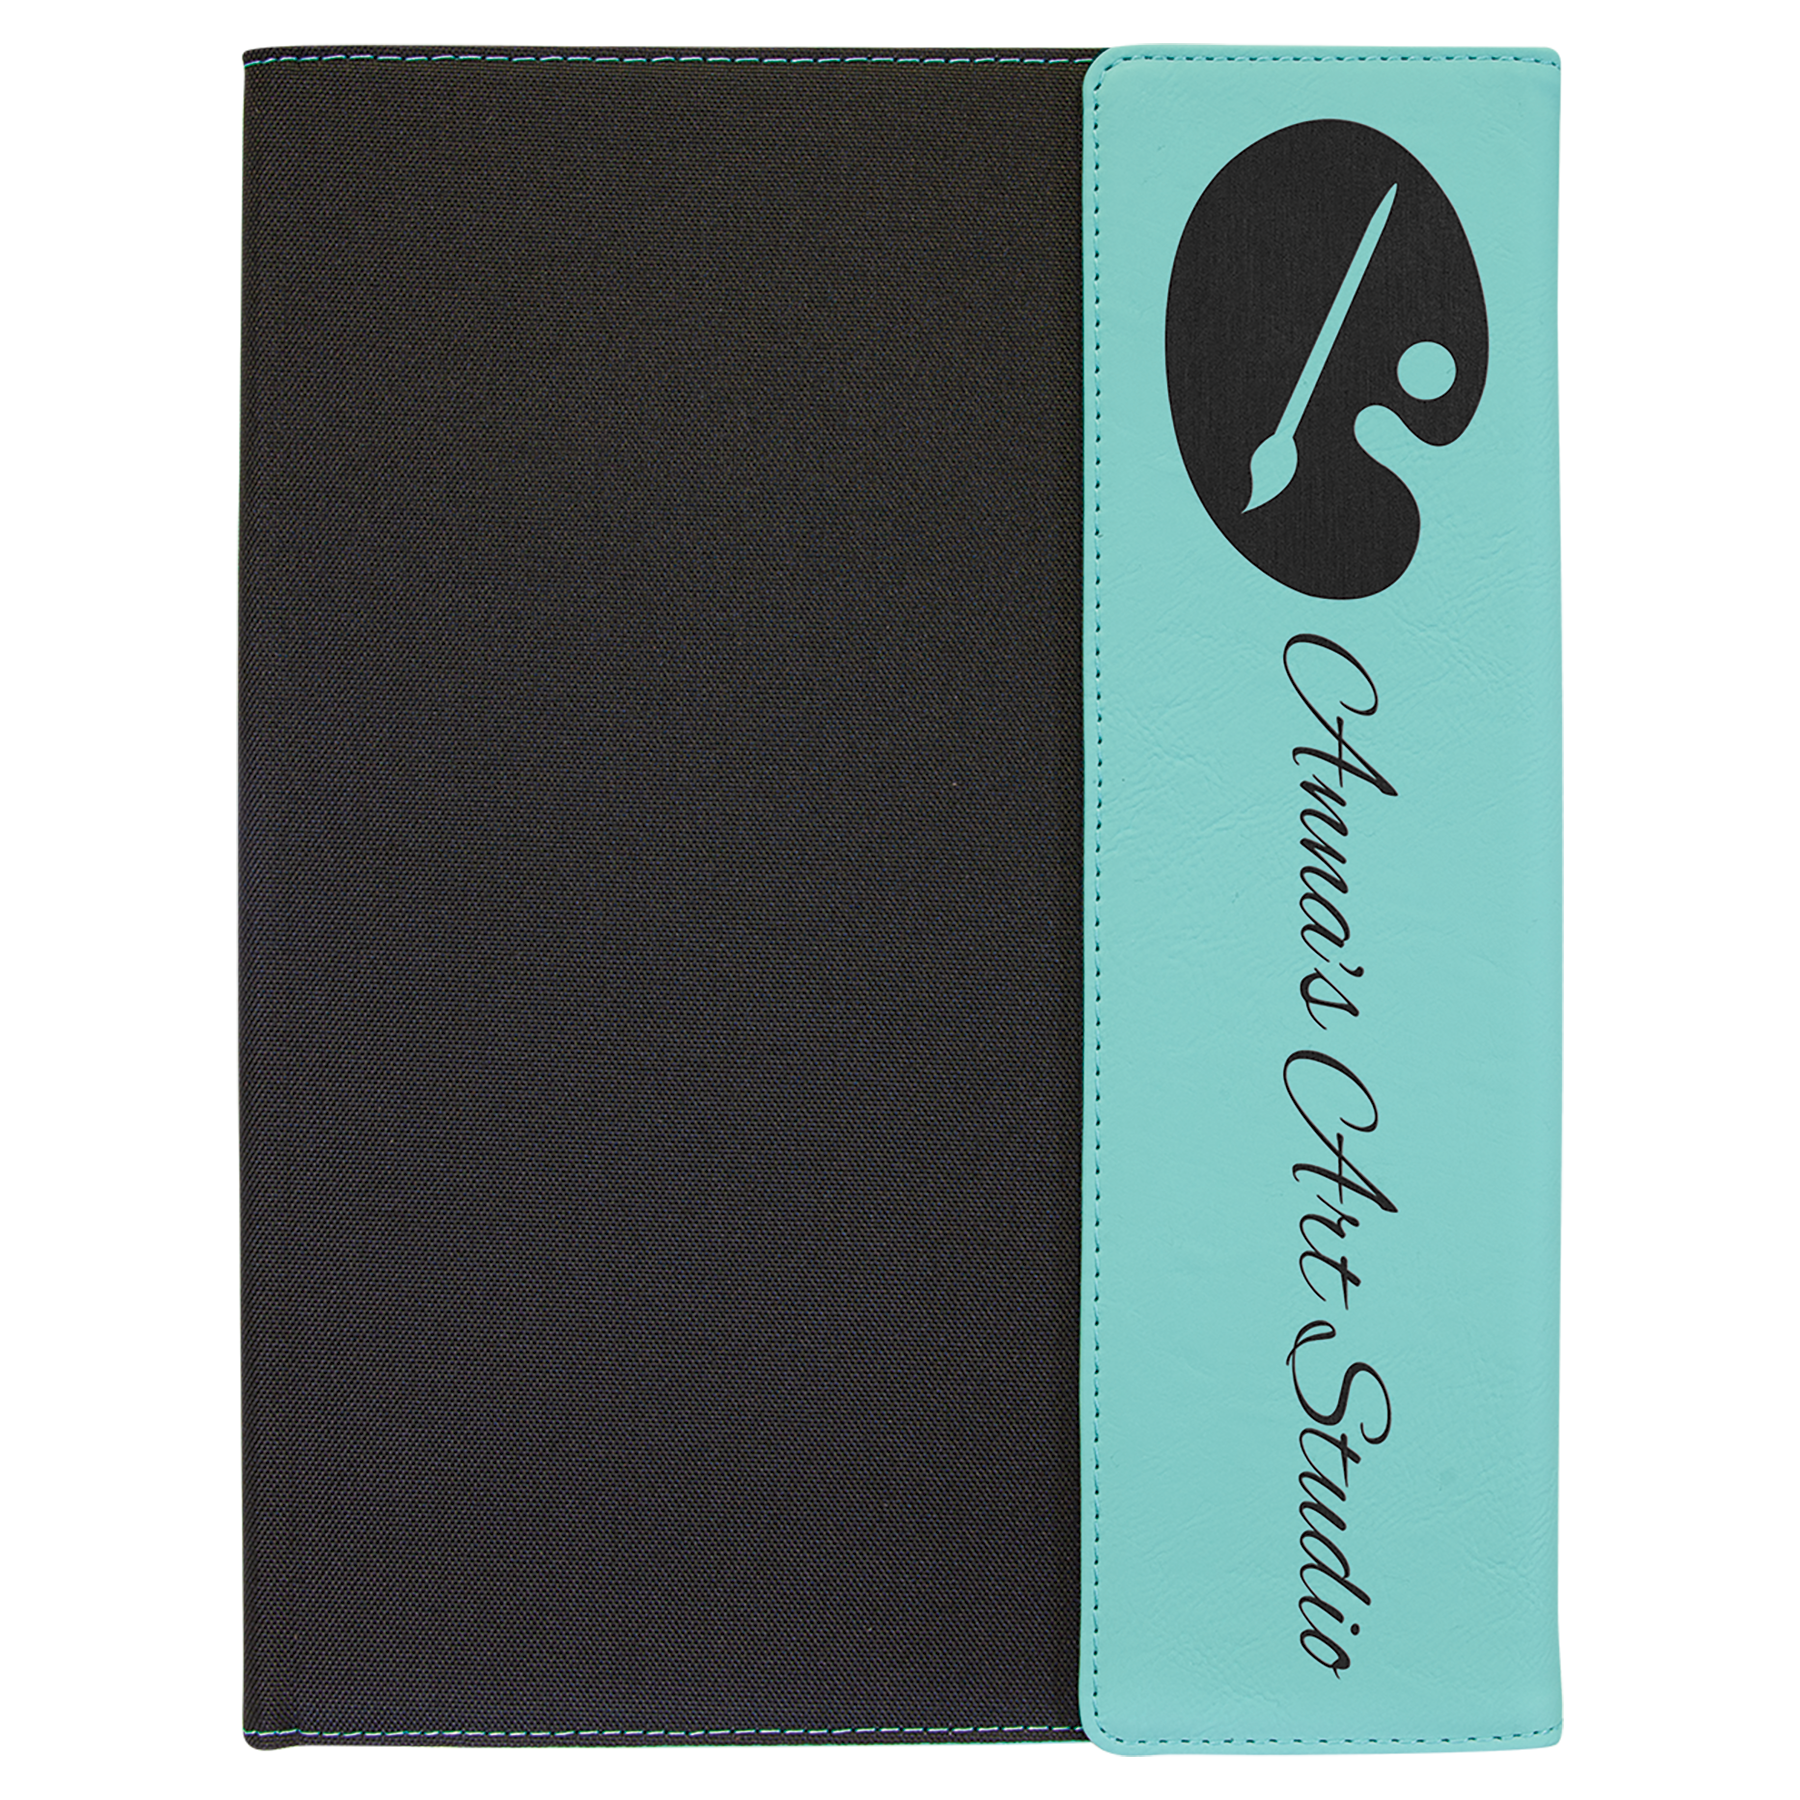 9 1/2" x 12" Laserable Leatherette / Canvas Portfolio with Notepad - Beacon Laser Creations LLC